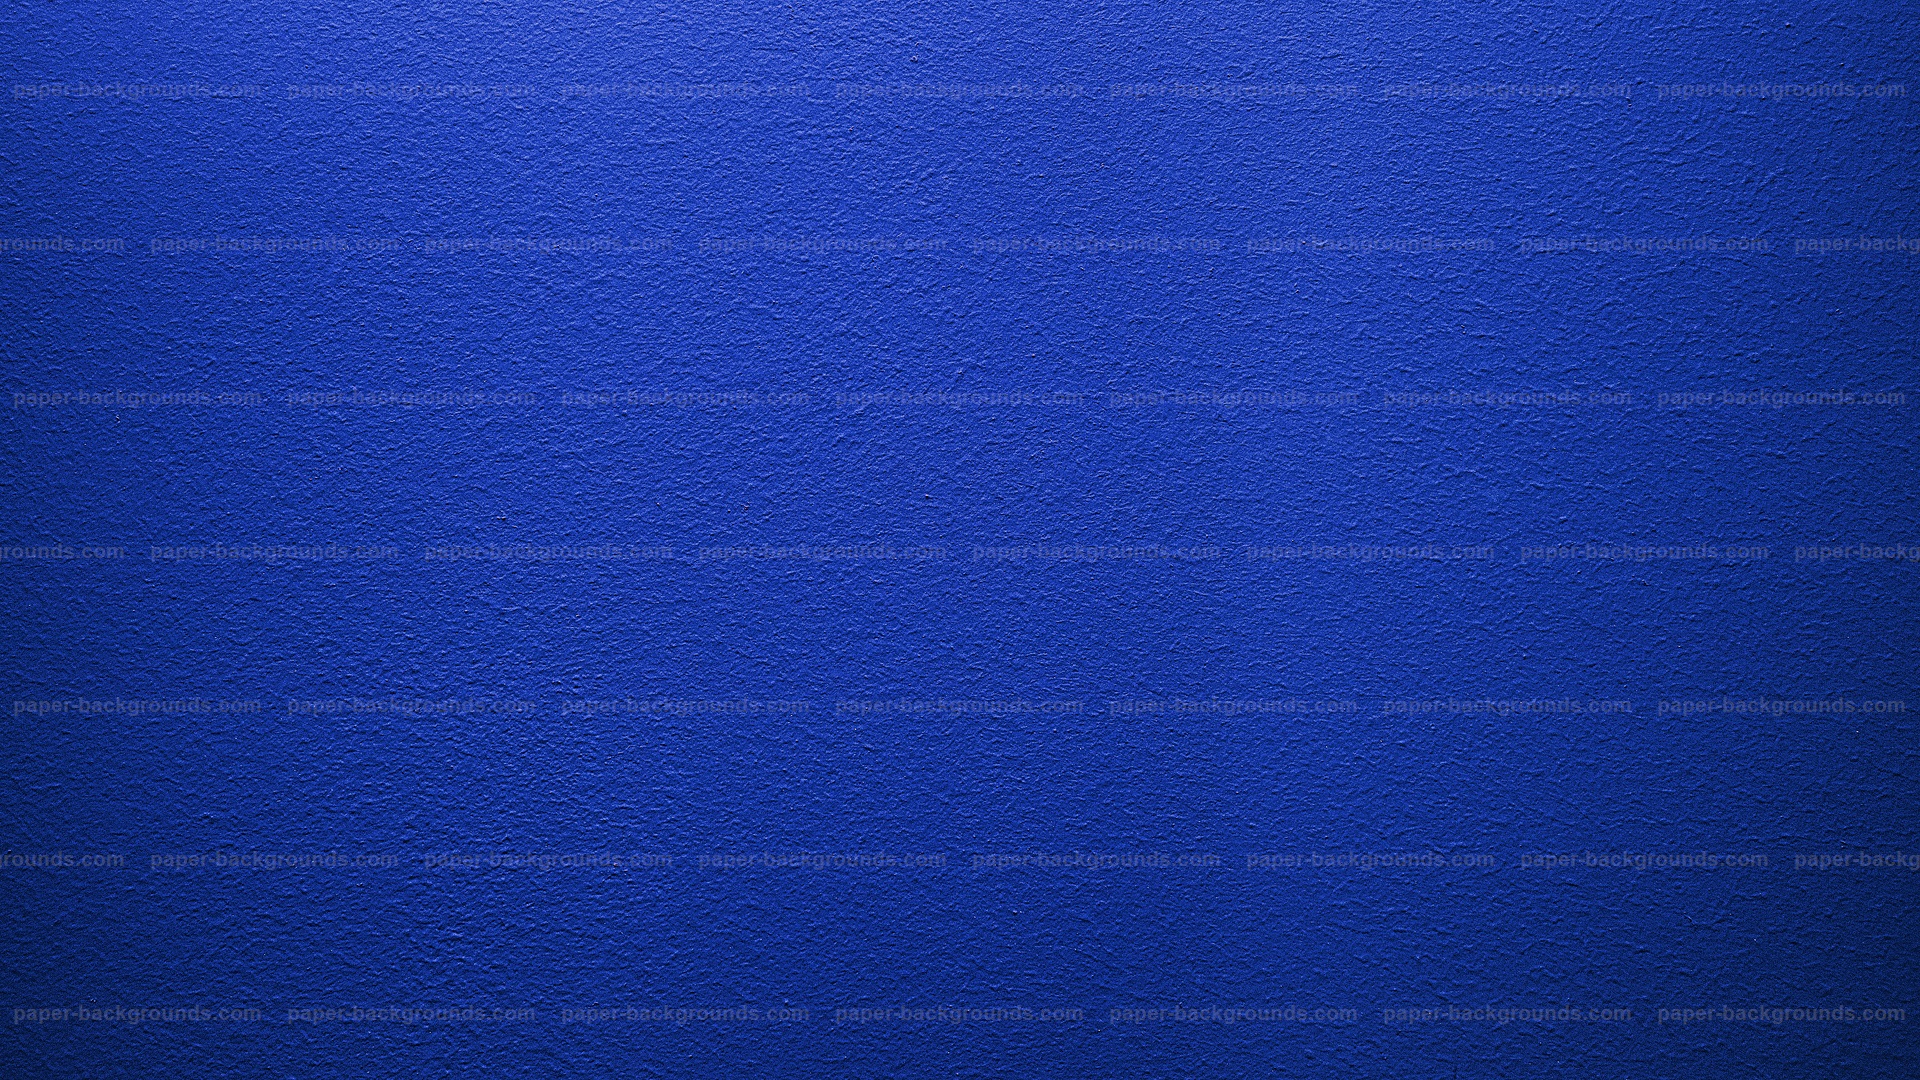 Paper Backgrounds | blue wall | Royalty Free HD Paper Backgrounds